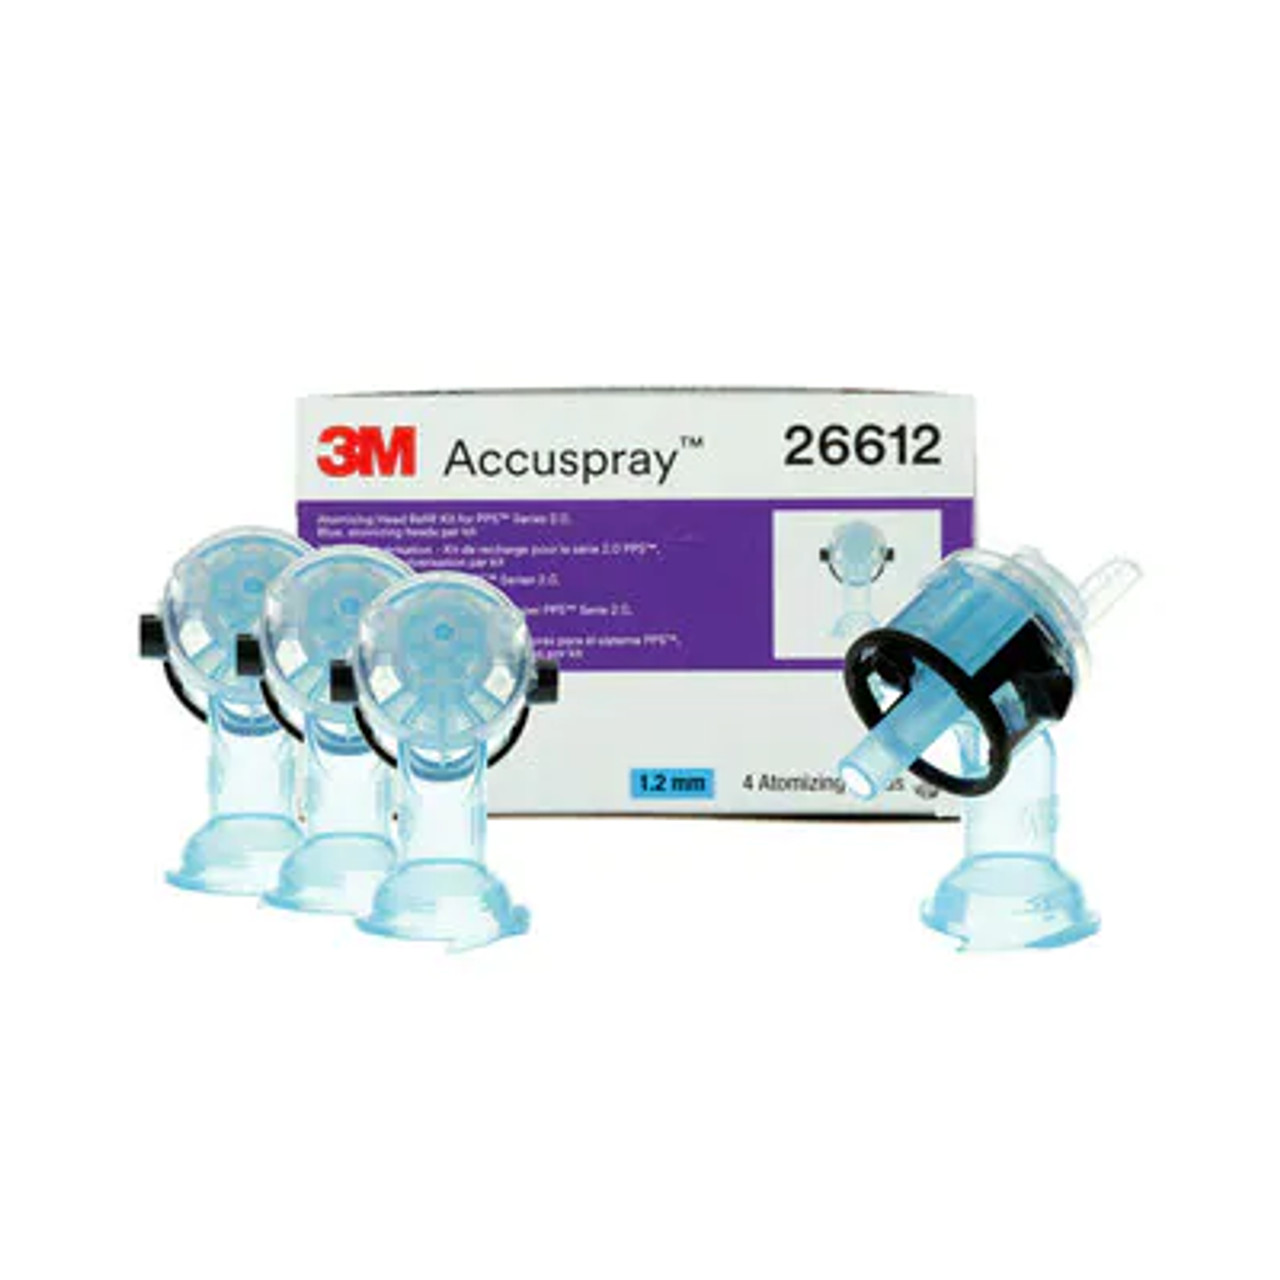 3M™ Accuspray™ Atomizing Head Refill Pack for 3M™ PPS™ Series 2.0, 26612, Blue, 1.2 mm, 4 nozzles per pack